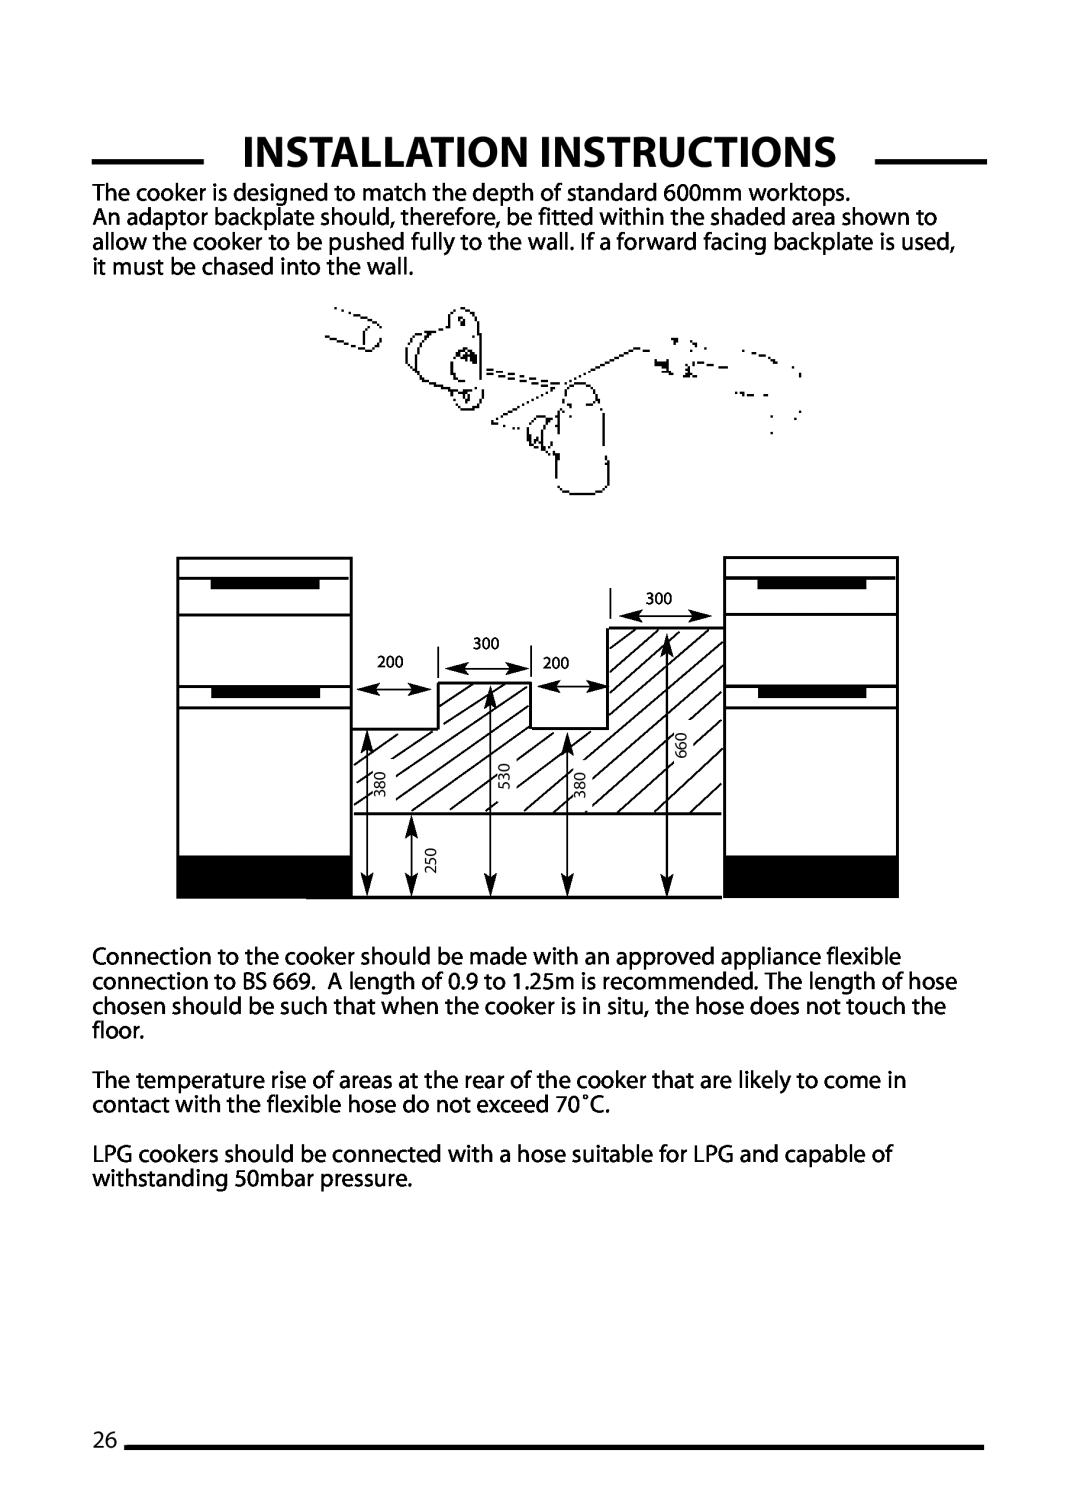 Cannon ICON 1000, 10425G Installation Instructions, The cooker is designed to match the depth of standard 600mm worktops 